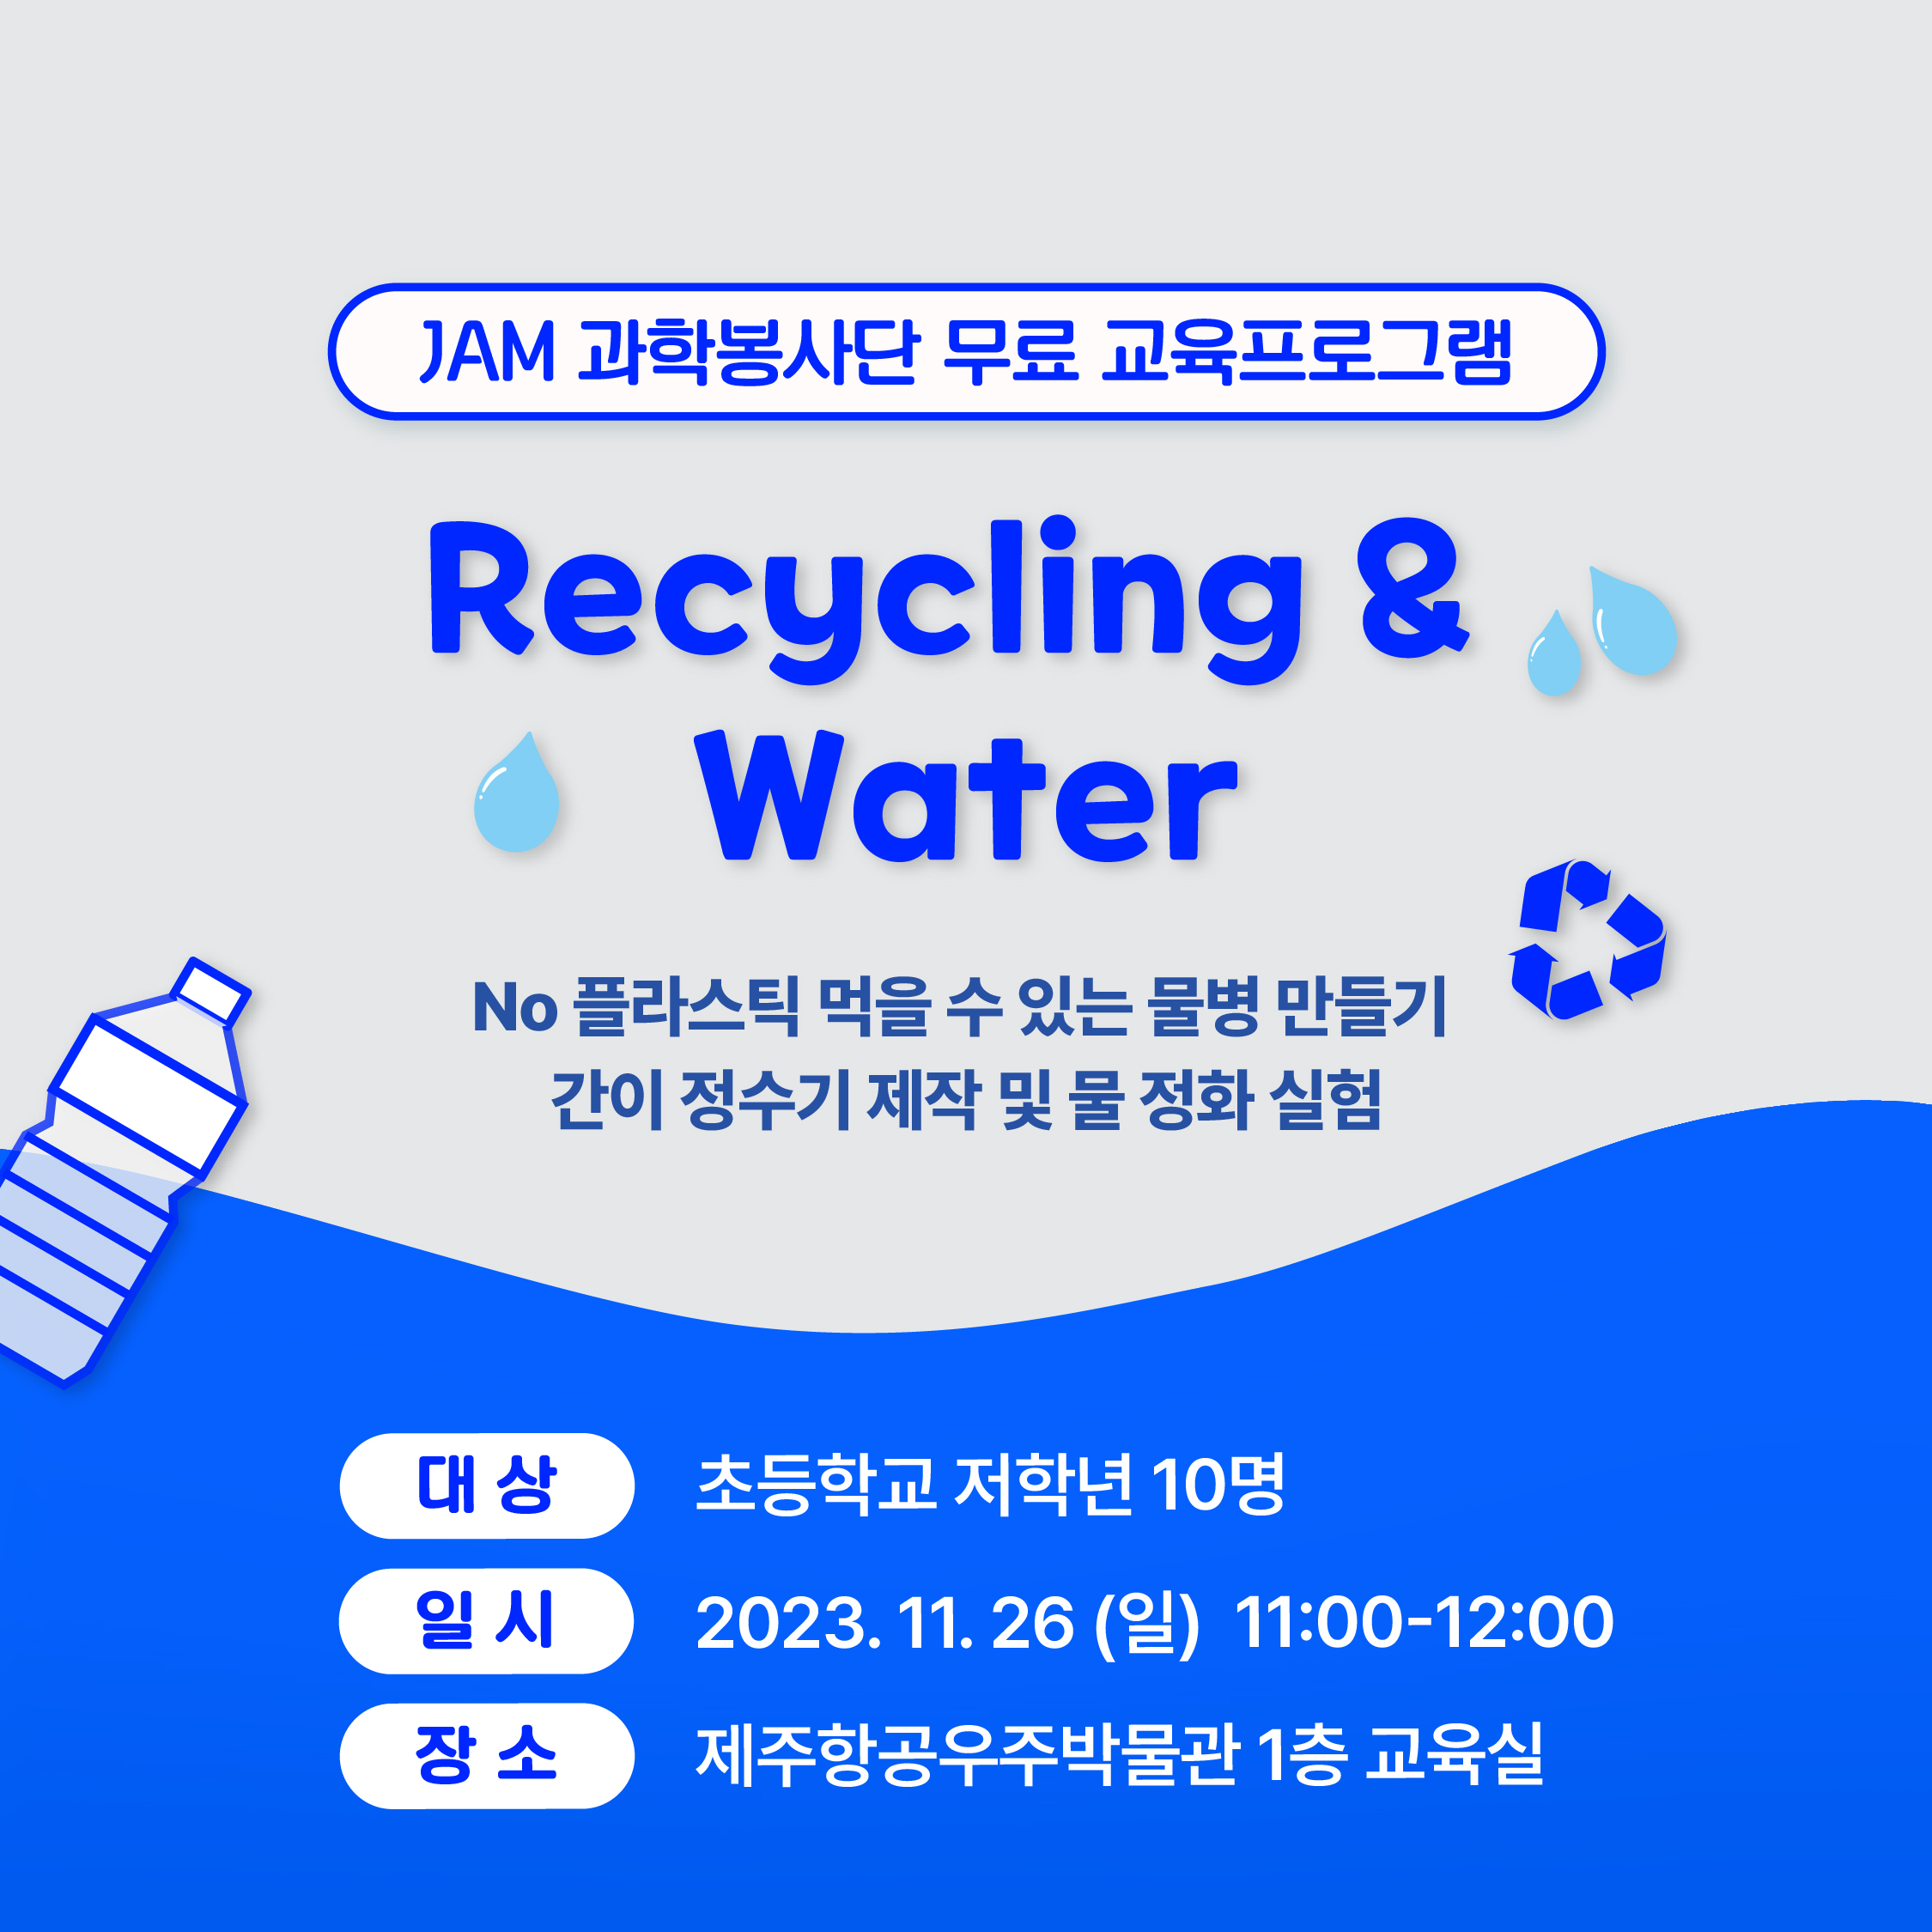 Recycling & Water 